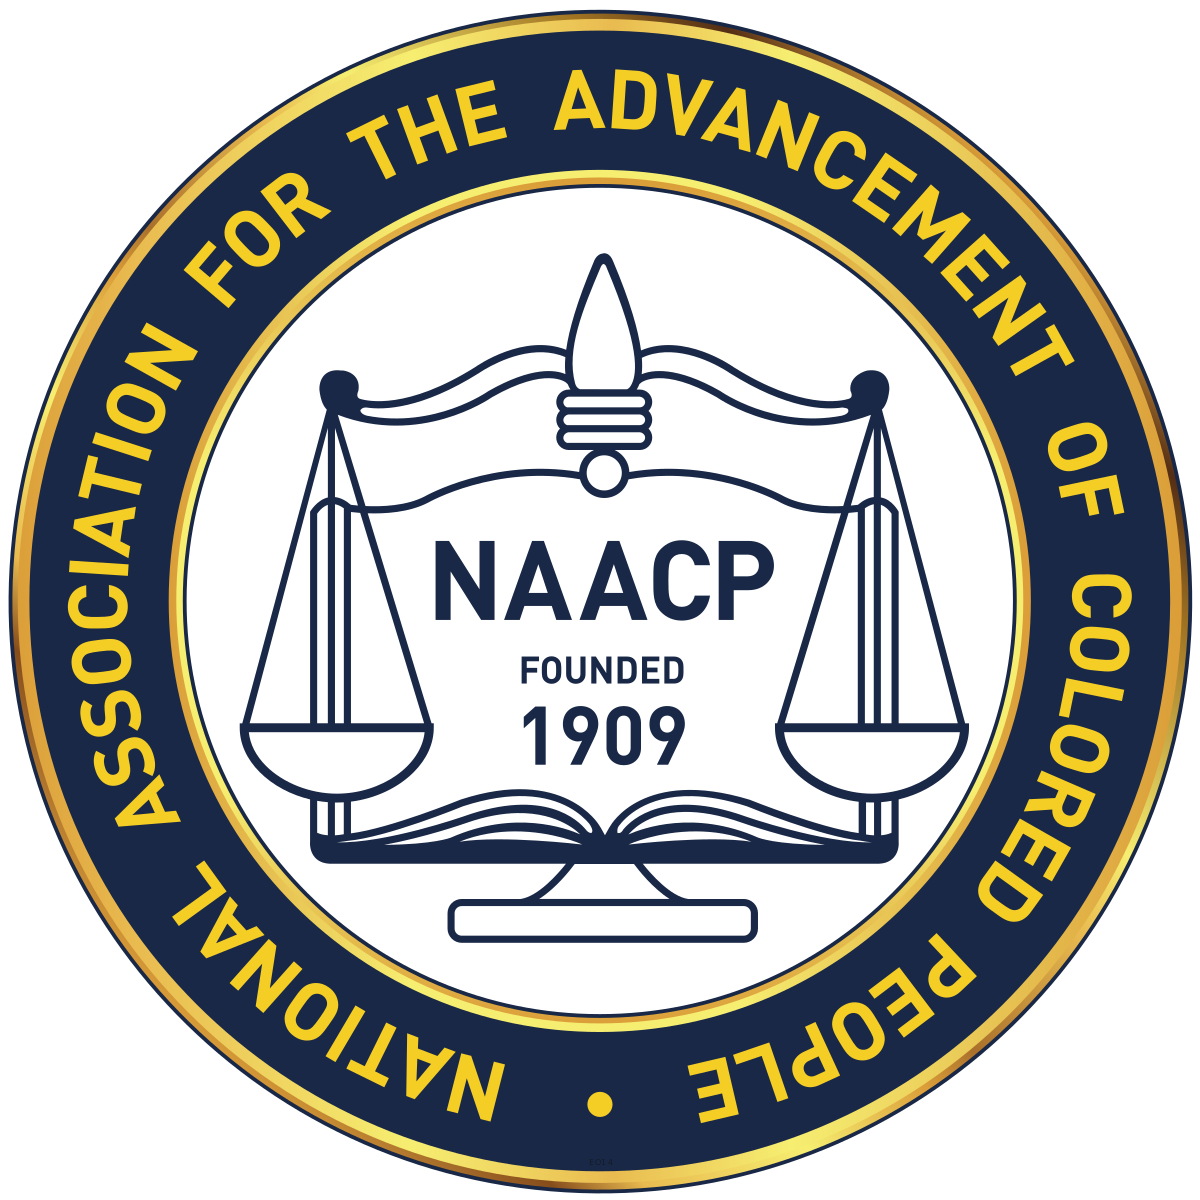 A look inside the NAACP at Georgia Southern University